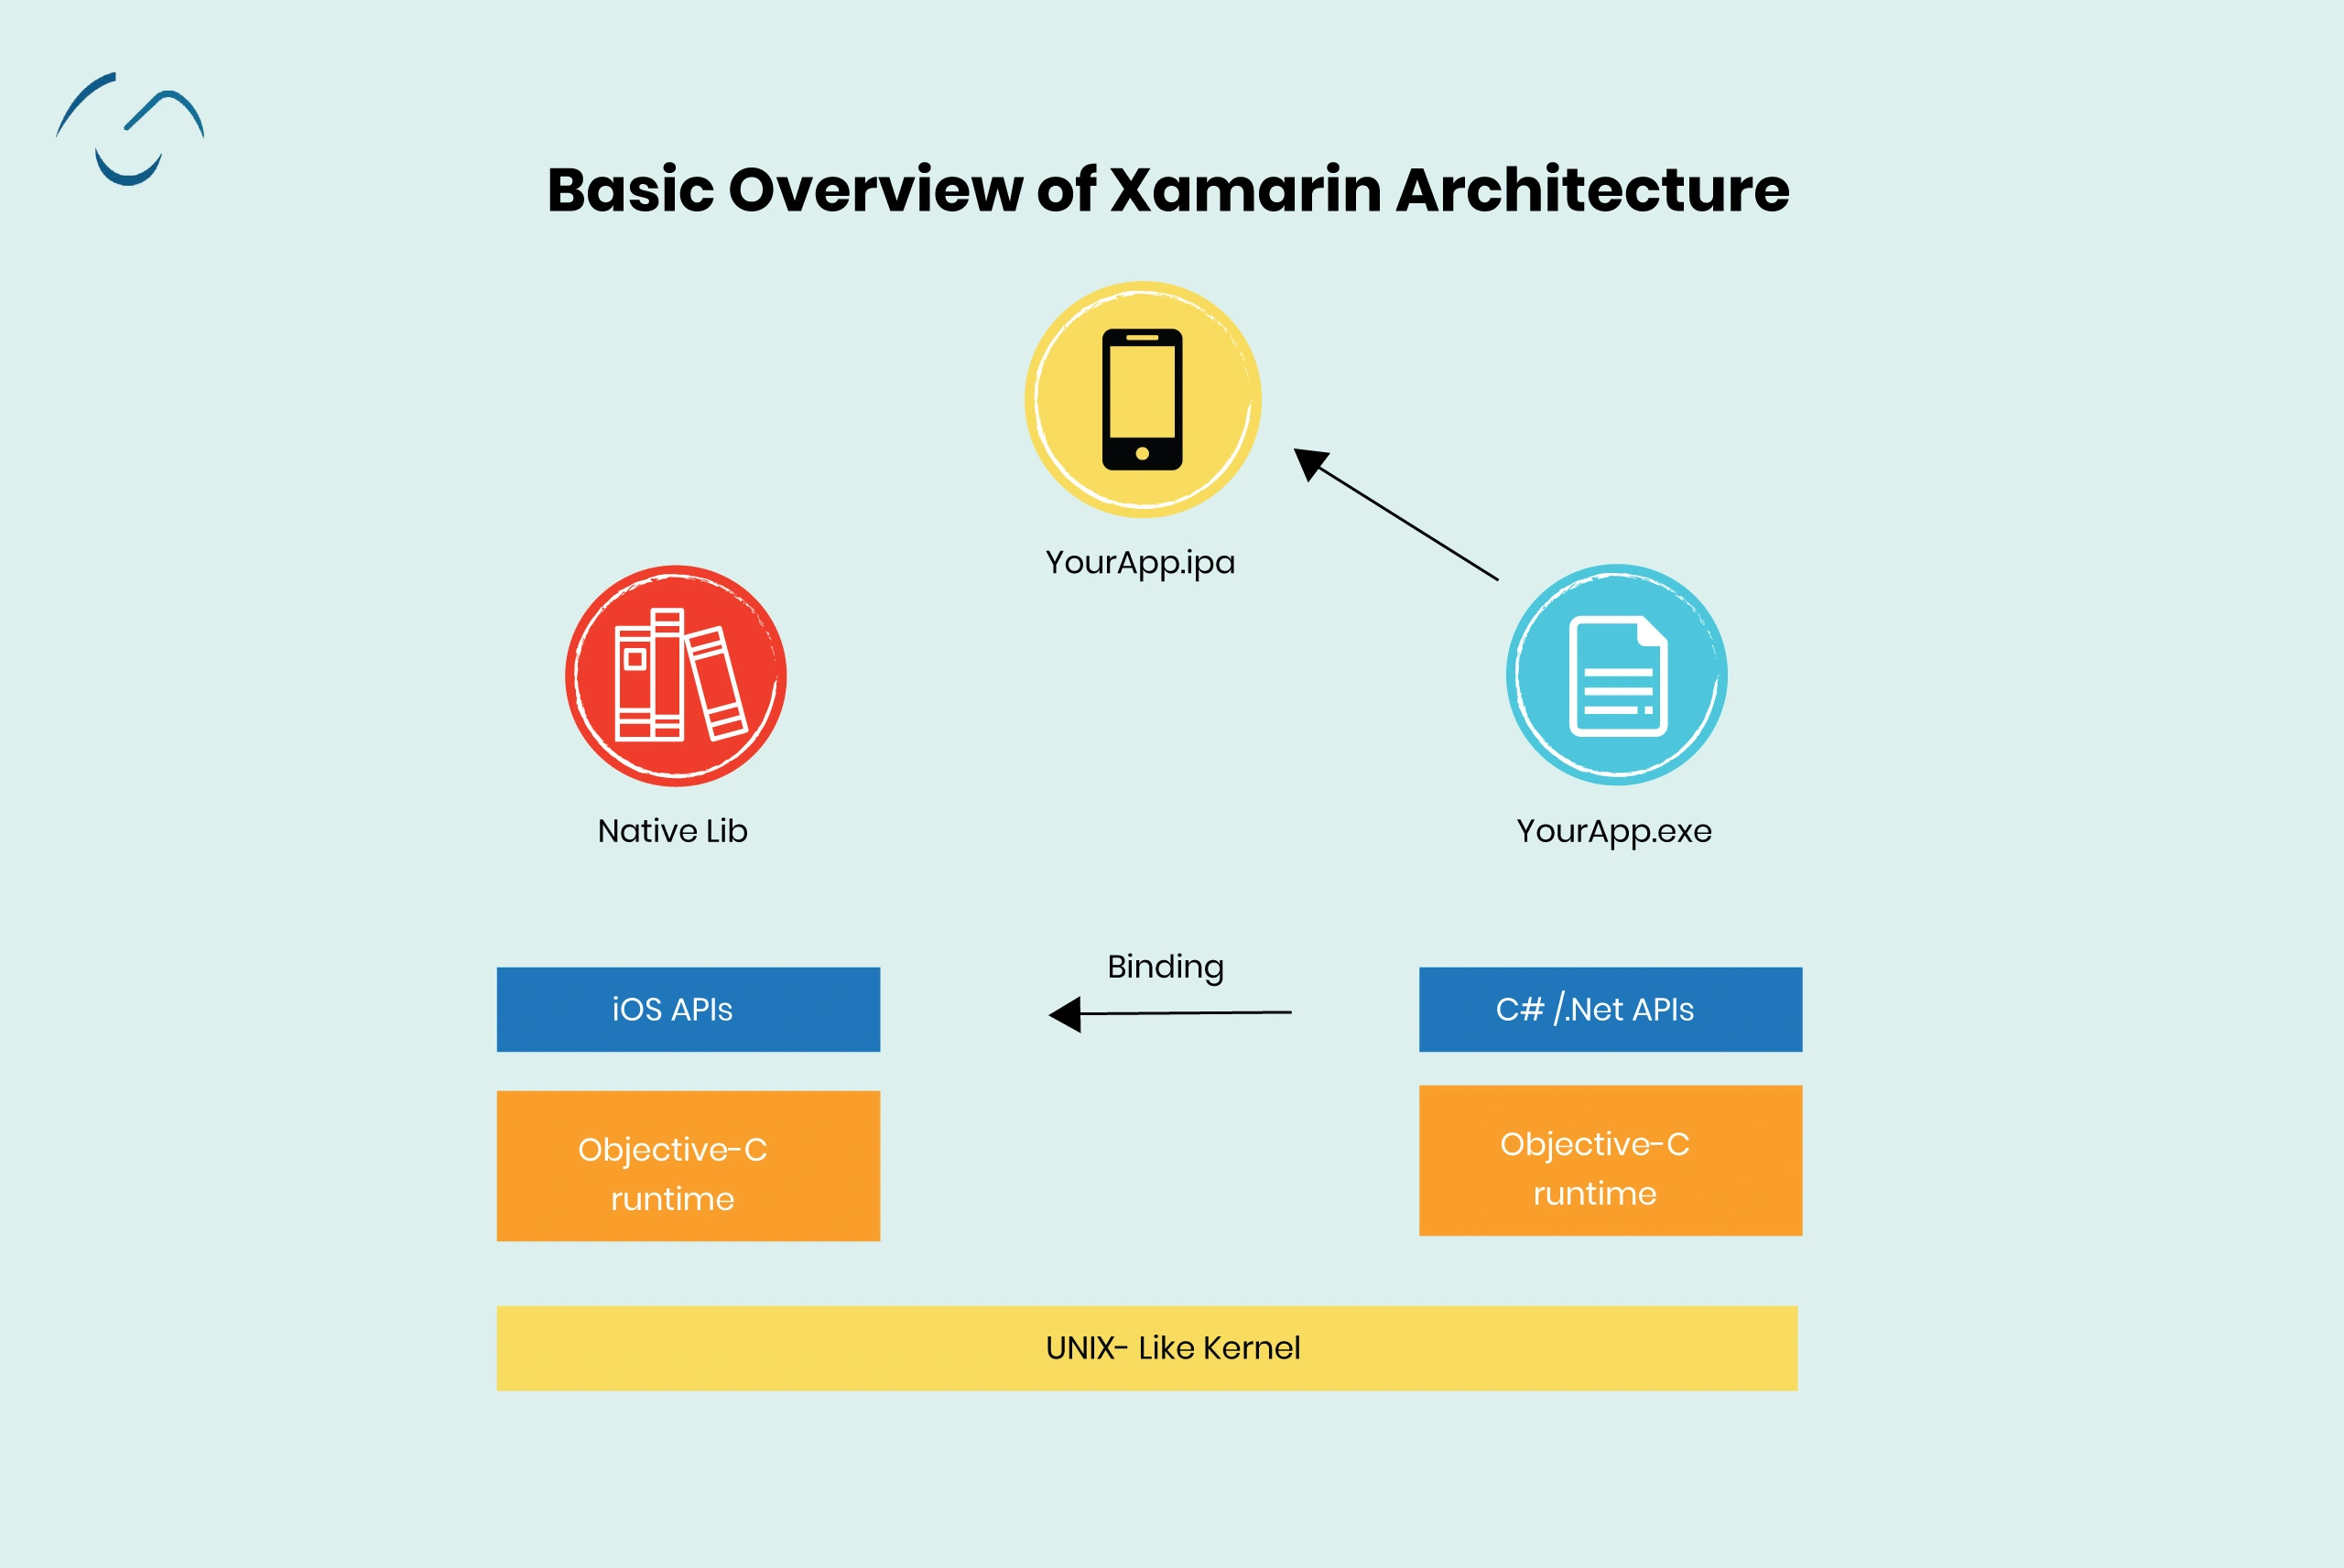 Basic overview of Xamarin Architecture